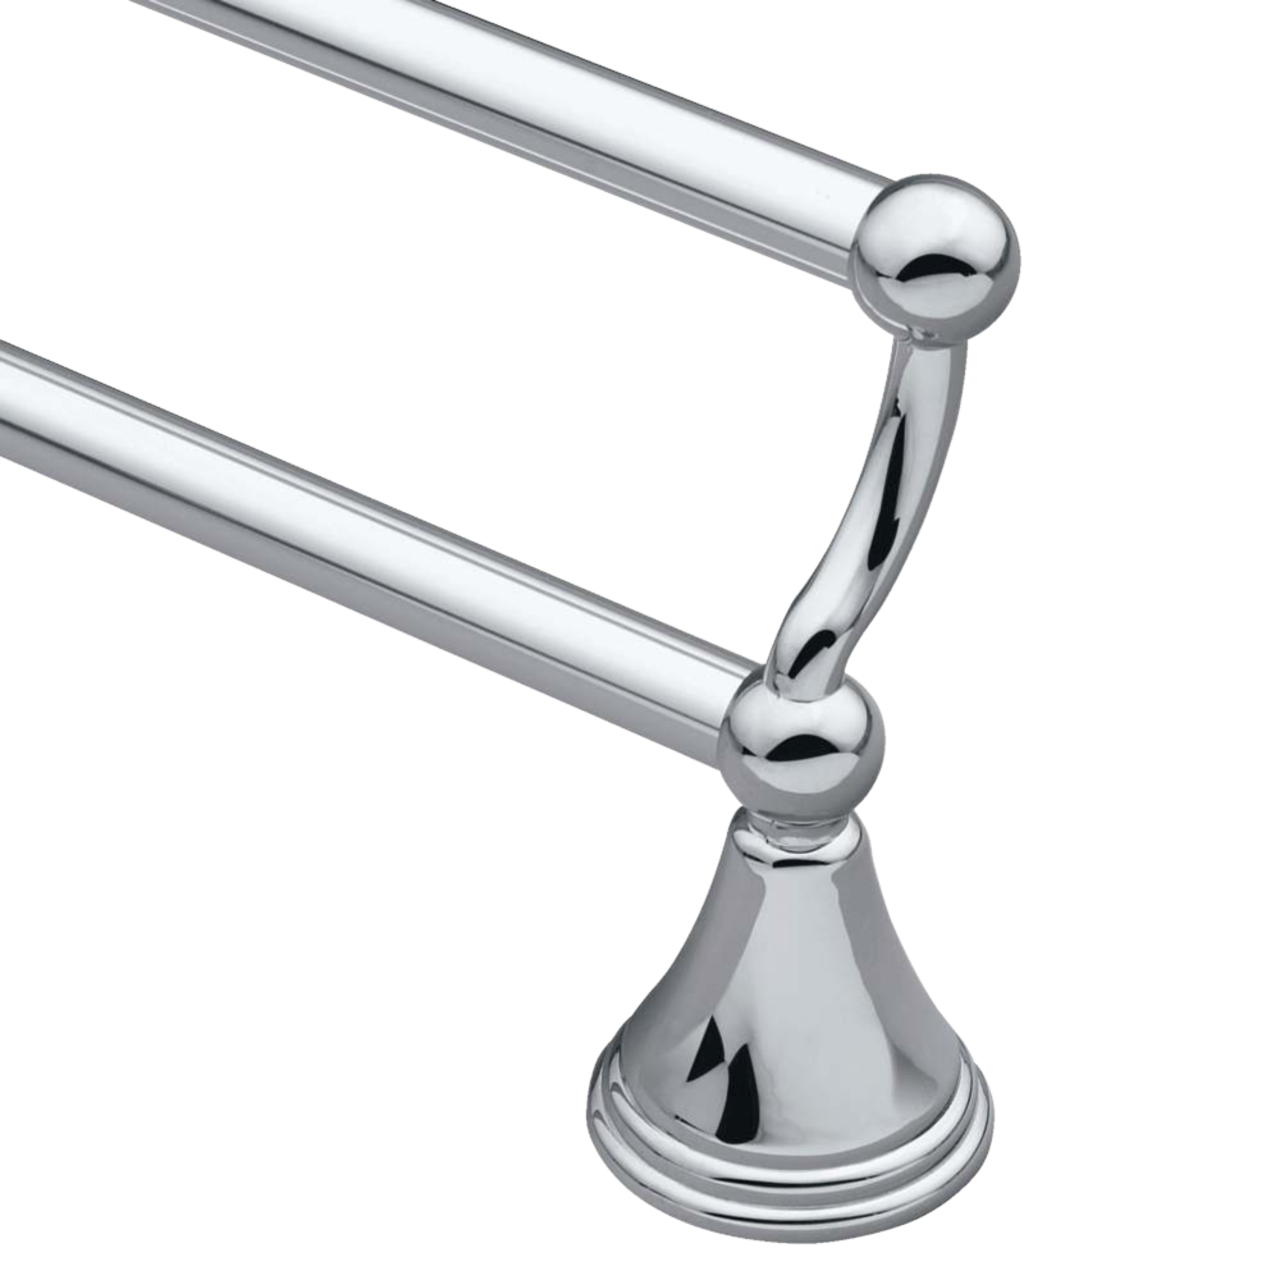 https://media-www.canadiantire.ca/product/fixing/plumbing/faucets-fixtures/0635140/moen-preston-24-double-towel-bar--def30bc6-93c8-4b17-8954-33c6bb63ef56.png?imdensity=1&imwidth=1244&impolicy=mZoom